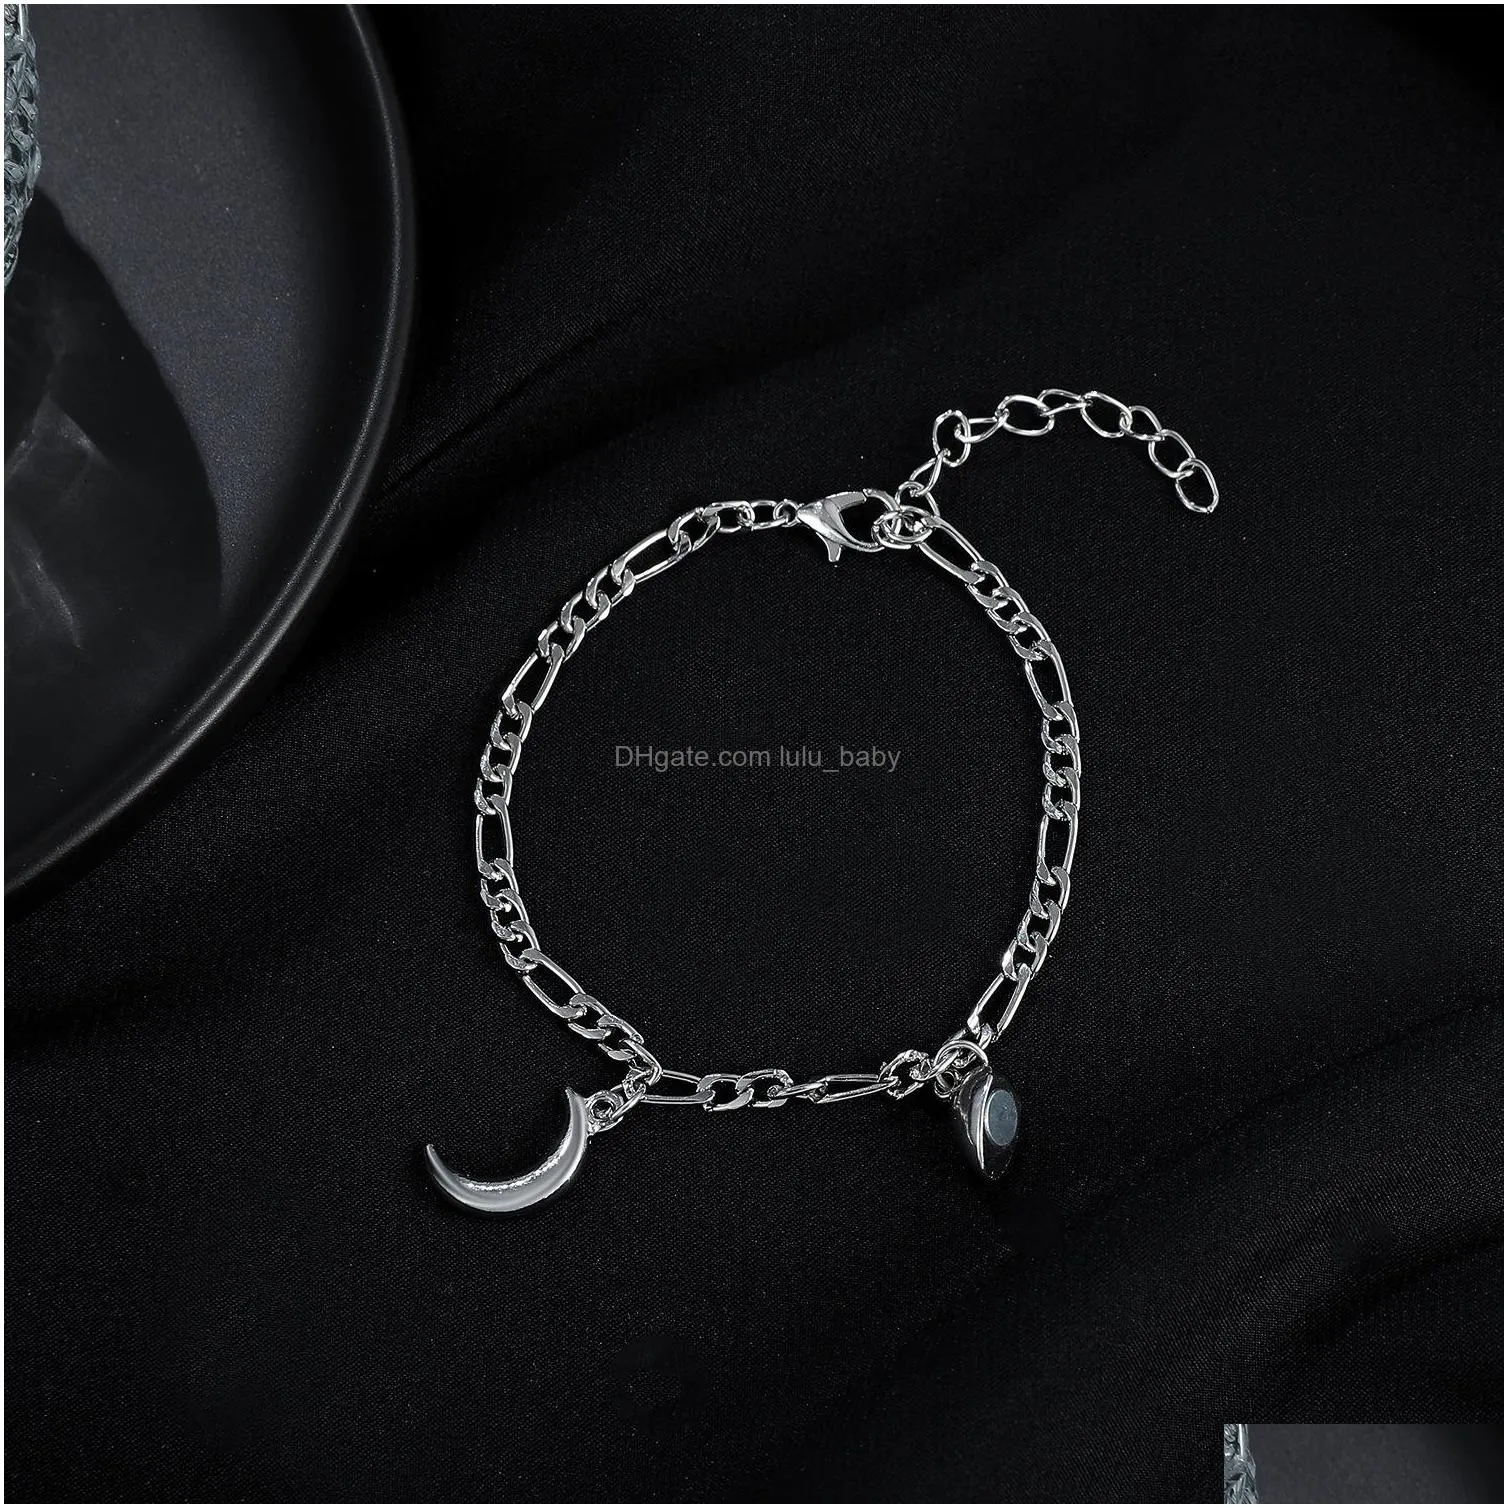 fashion jewelry sun moon charm magnetic stainless steel bracelet man woman couples lovers bracelets adjustable ornaments